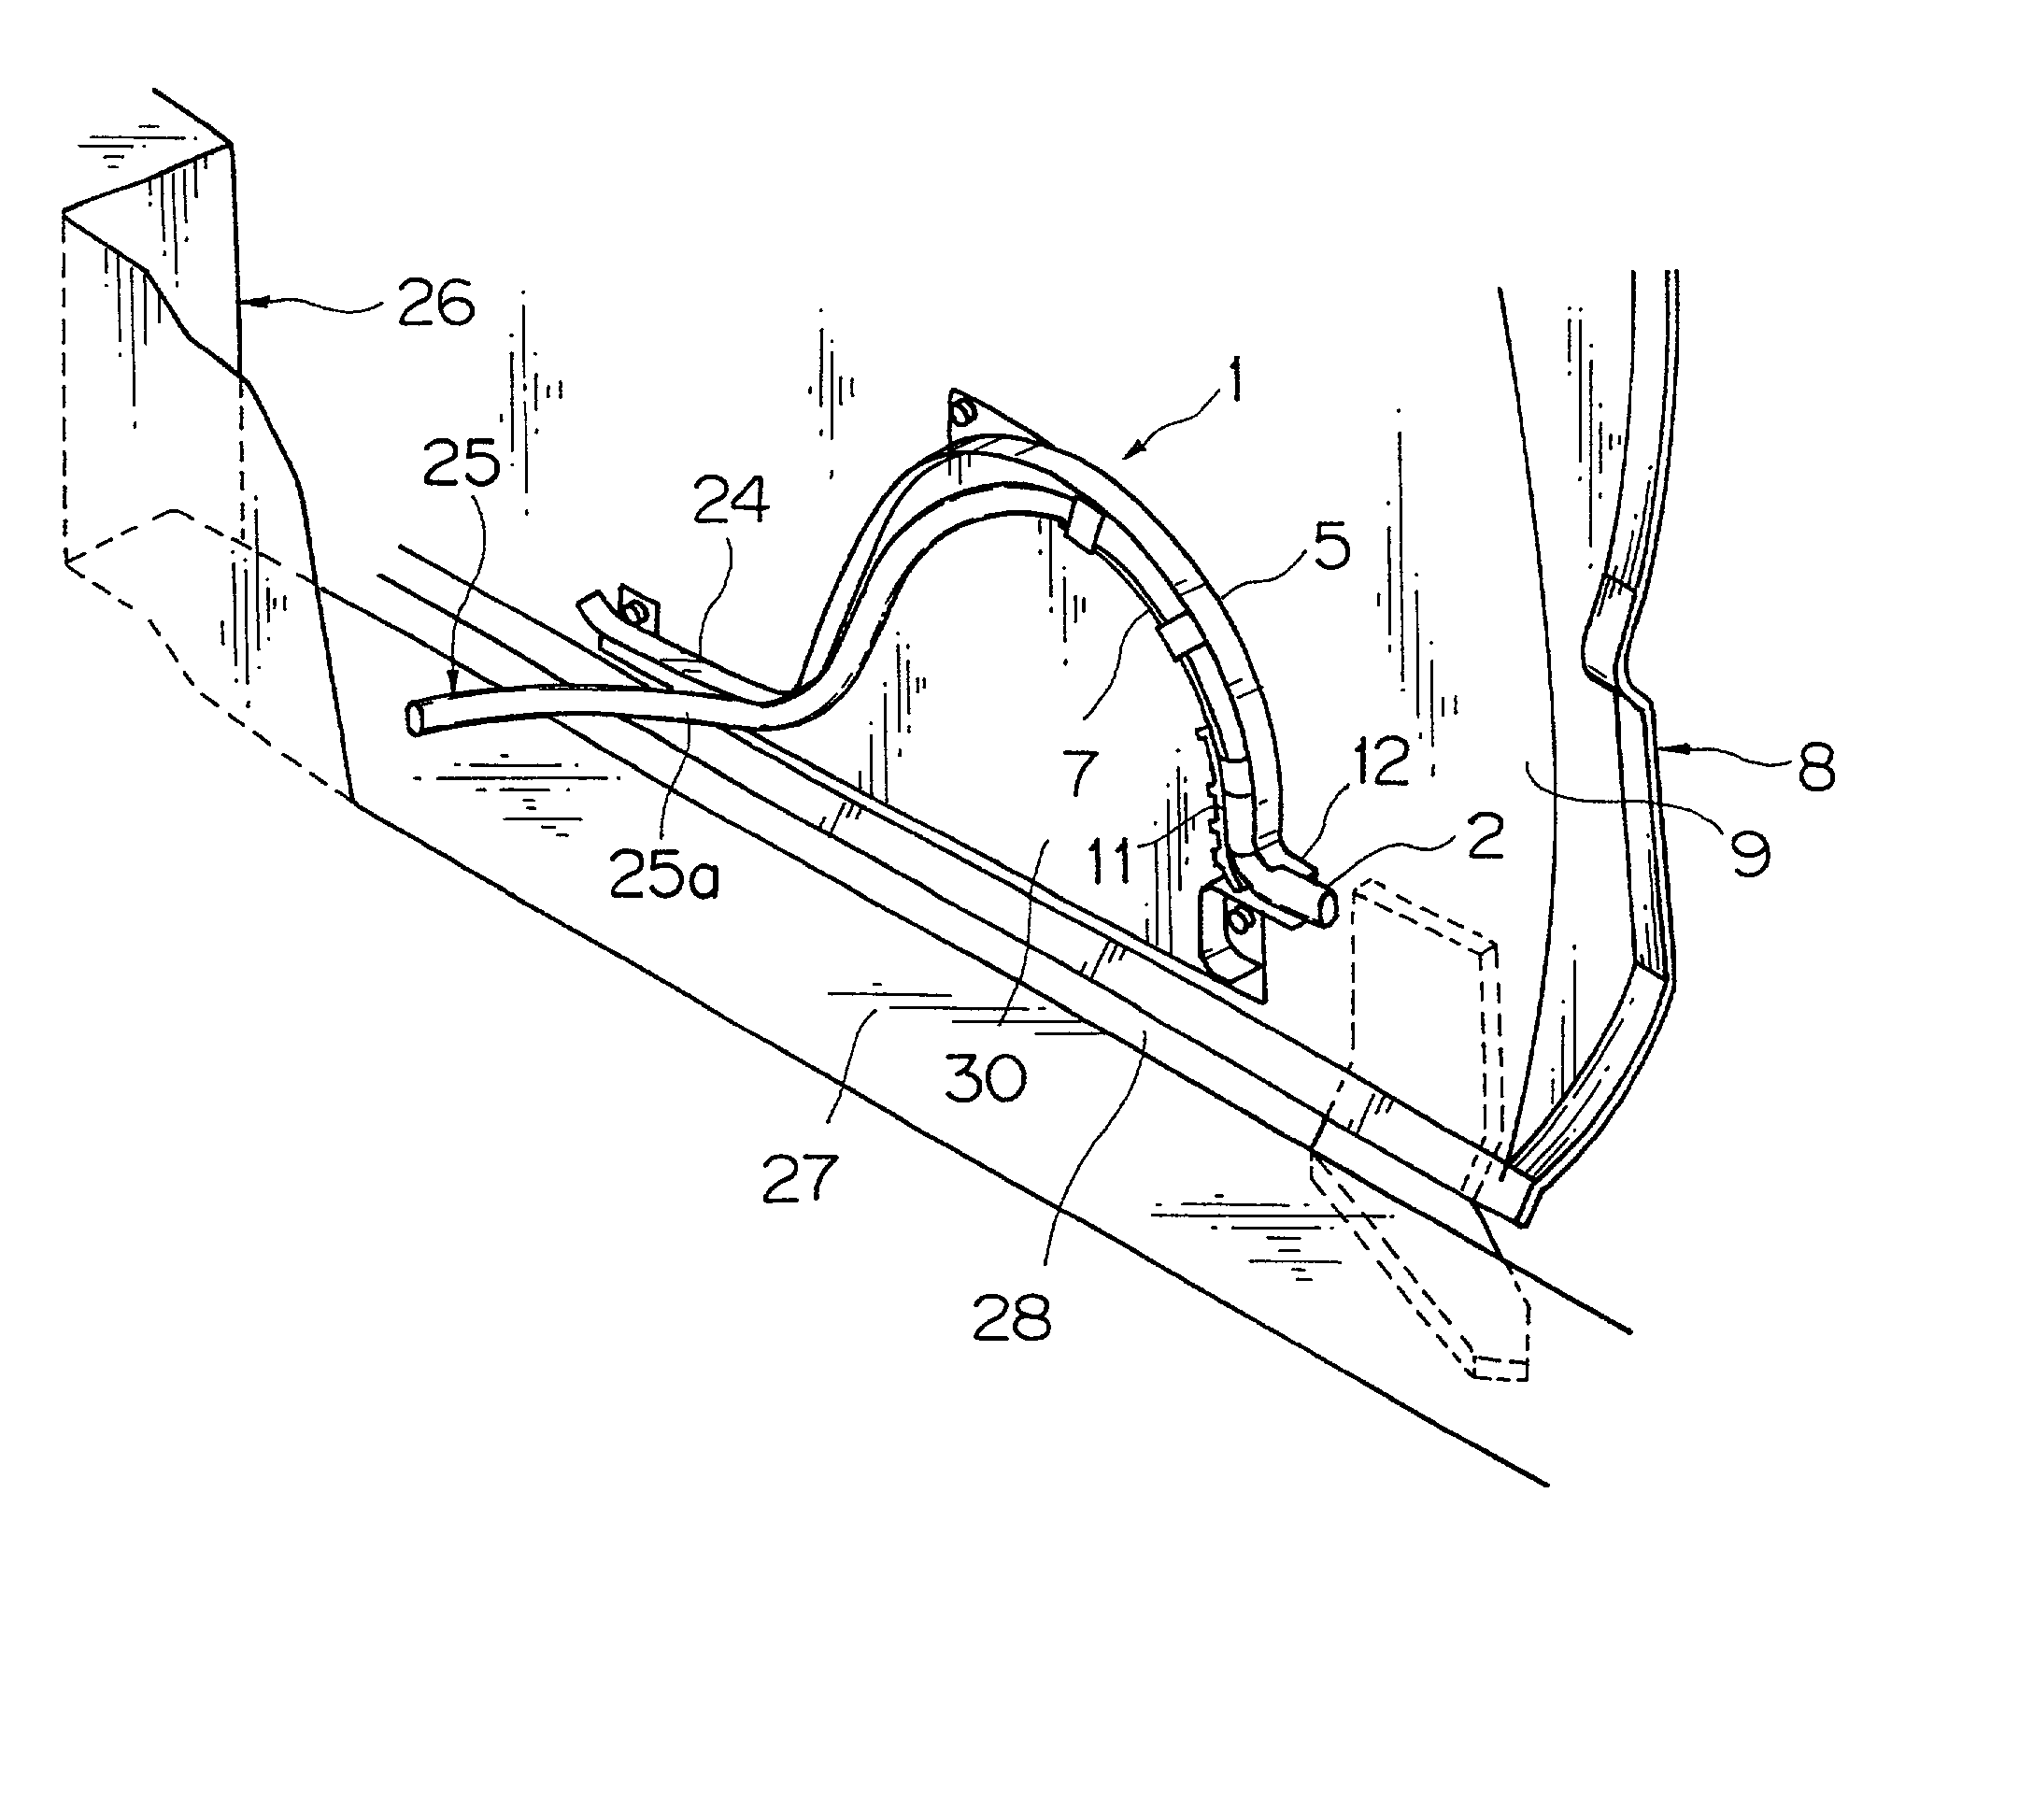 Structure of installing wire harness for sliding door